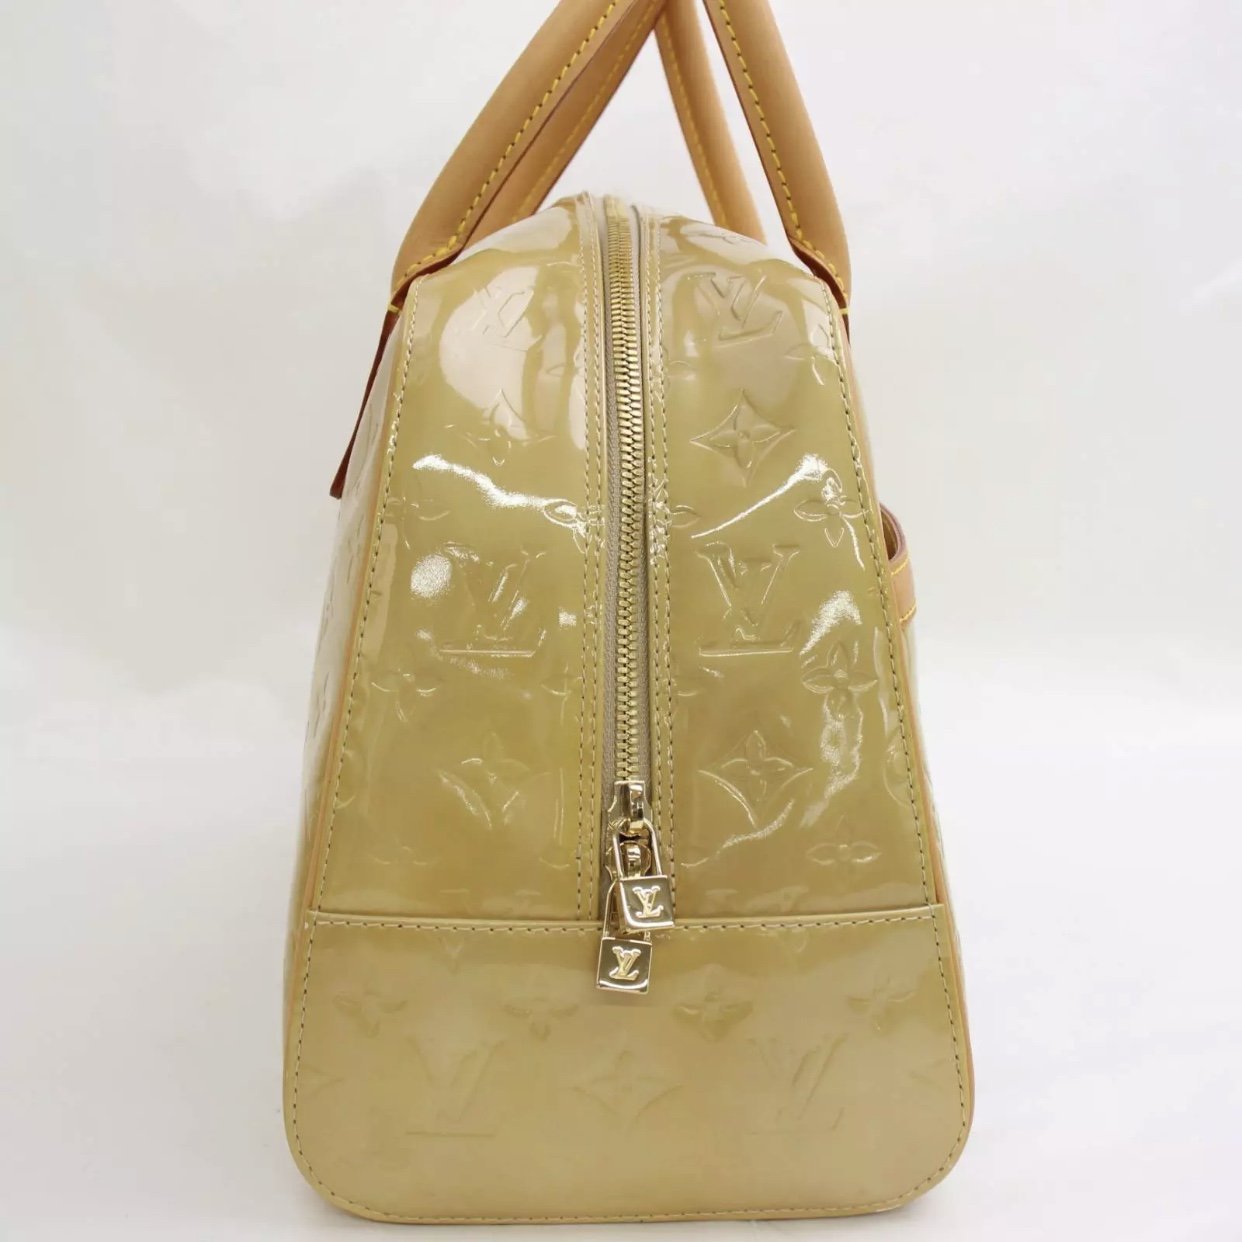 Tompkins square leather handbag Louis Vuitton Green in Leather - 35299508